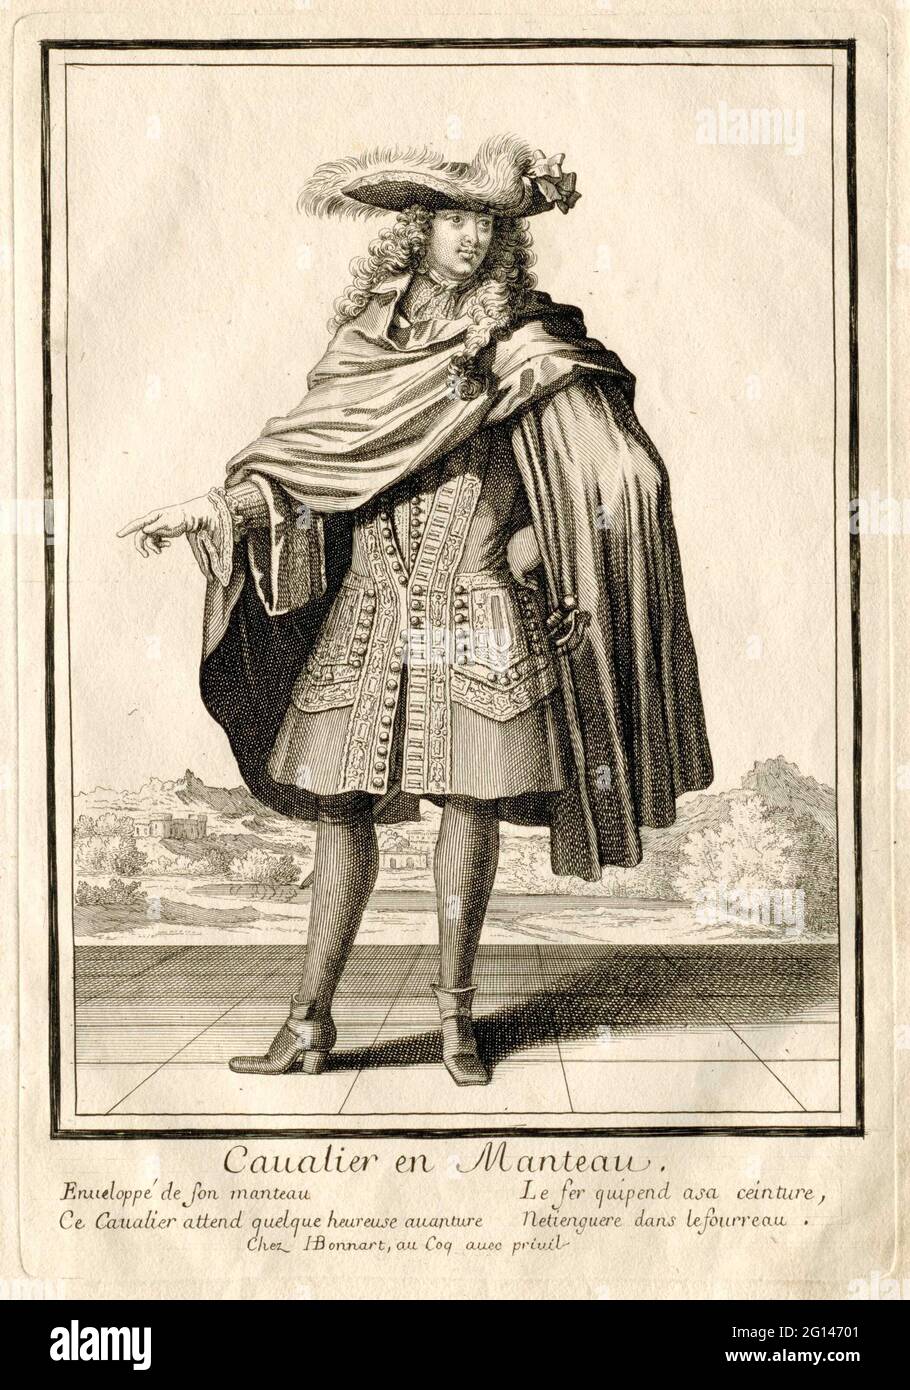 French nobleman with shoulder jacket; Cavalier and Manteau .. French  nobleman, seen from the front, dressed in a loose shoulder jacket over his  justaucorps. On his allonry capsel a hat with a